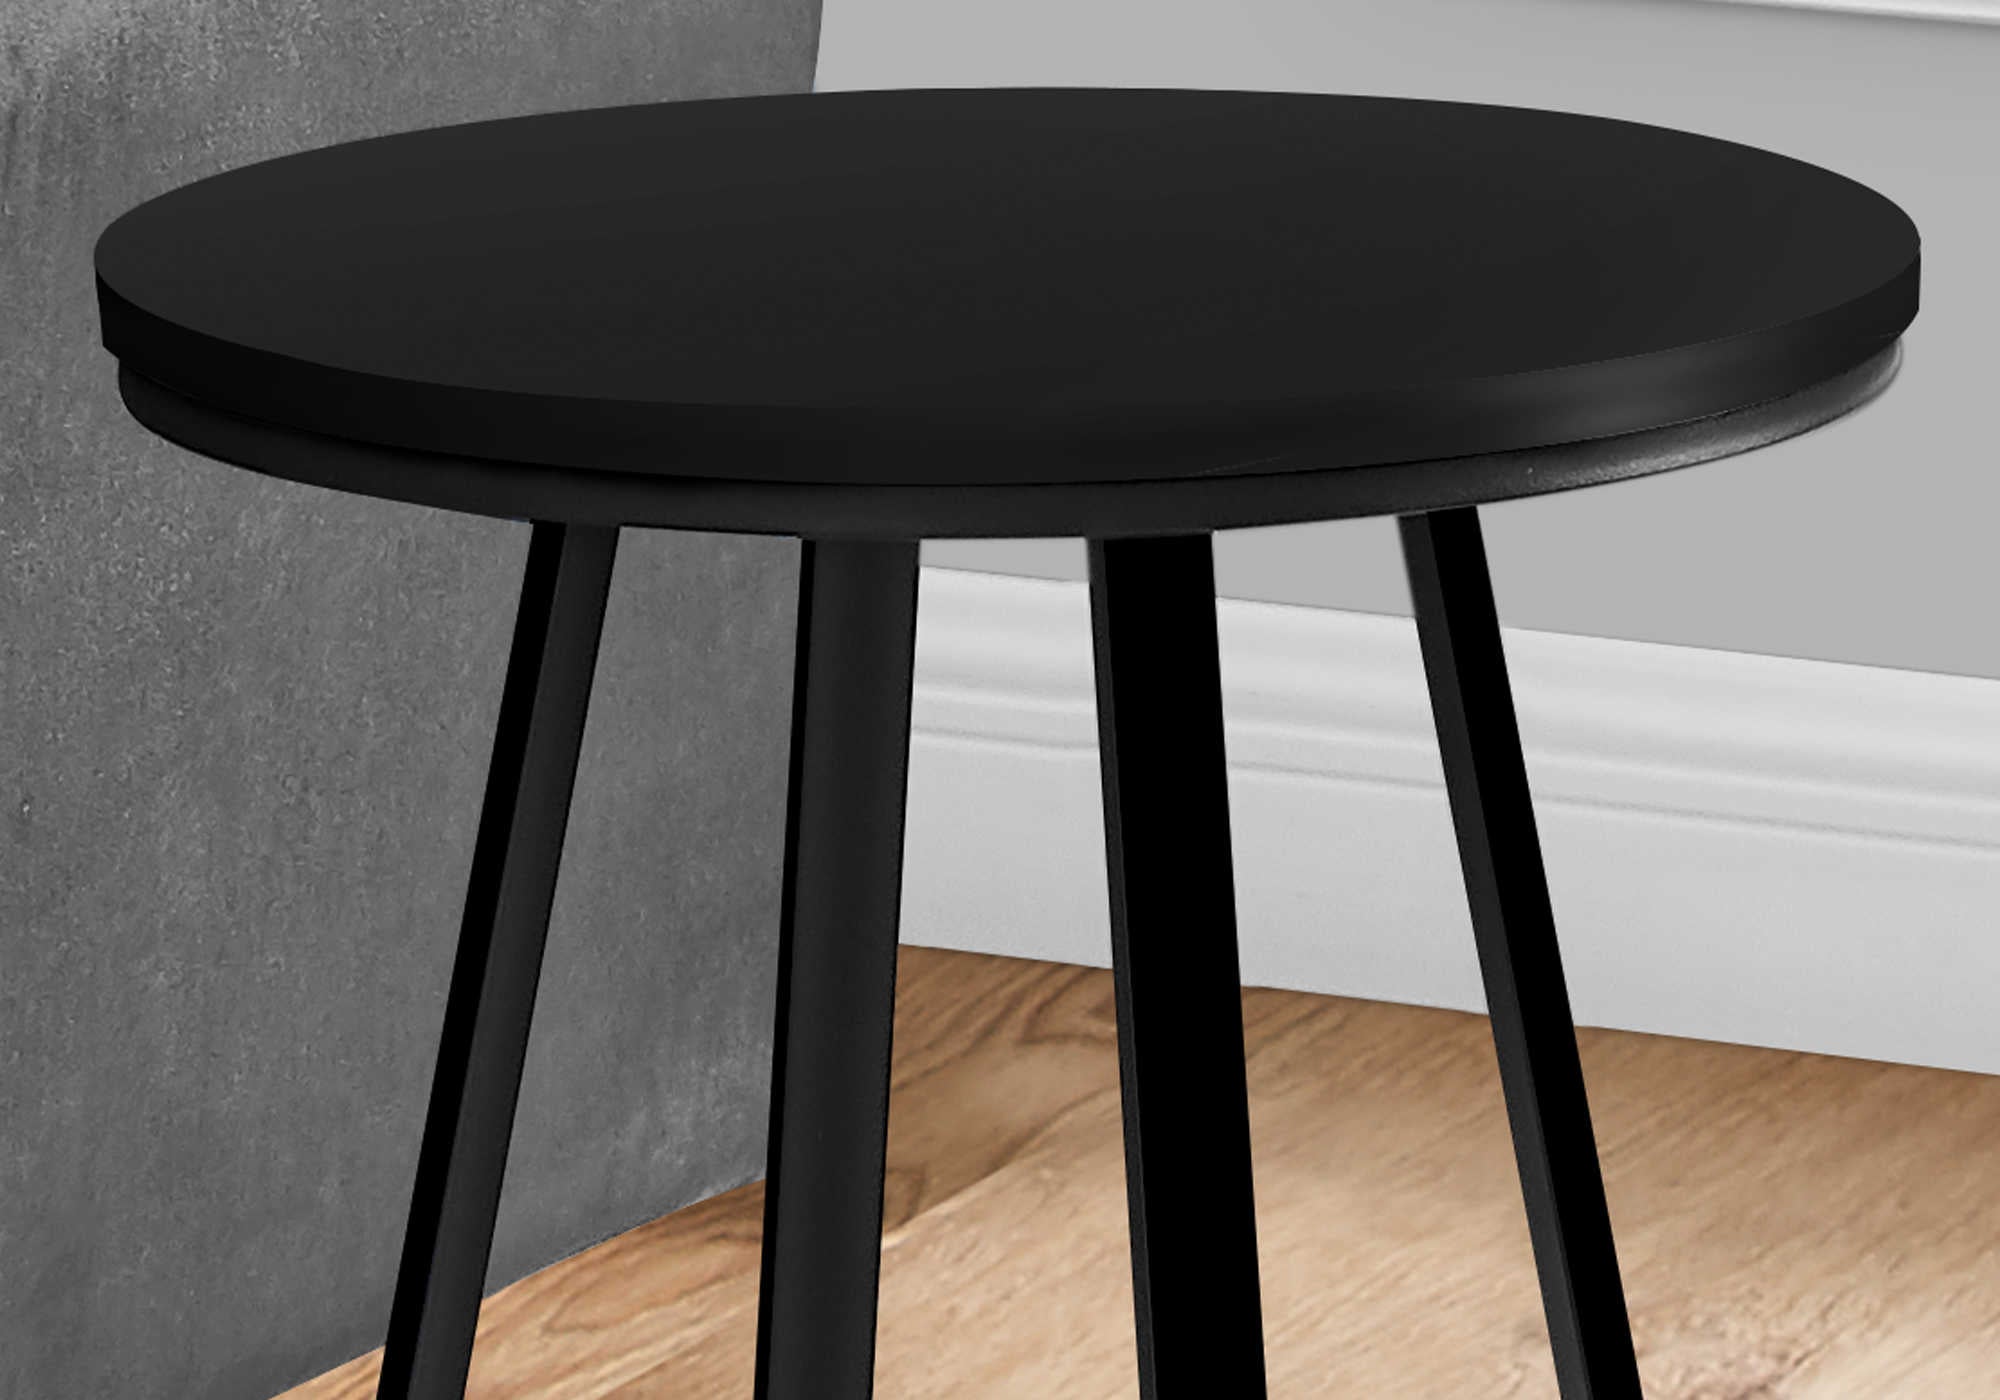 I 2175 - ACCENT TABLE - 22"H / BLACK / BLACK METAL BY MONARCH SPECIALTIES INC